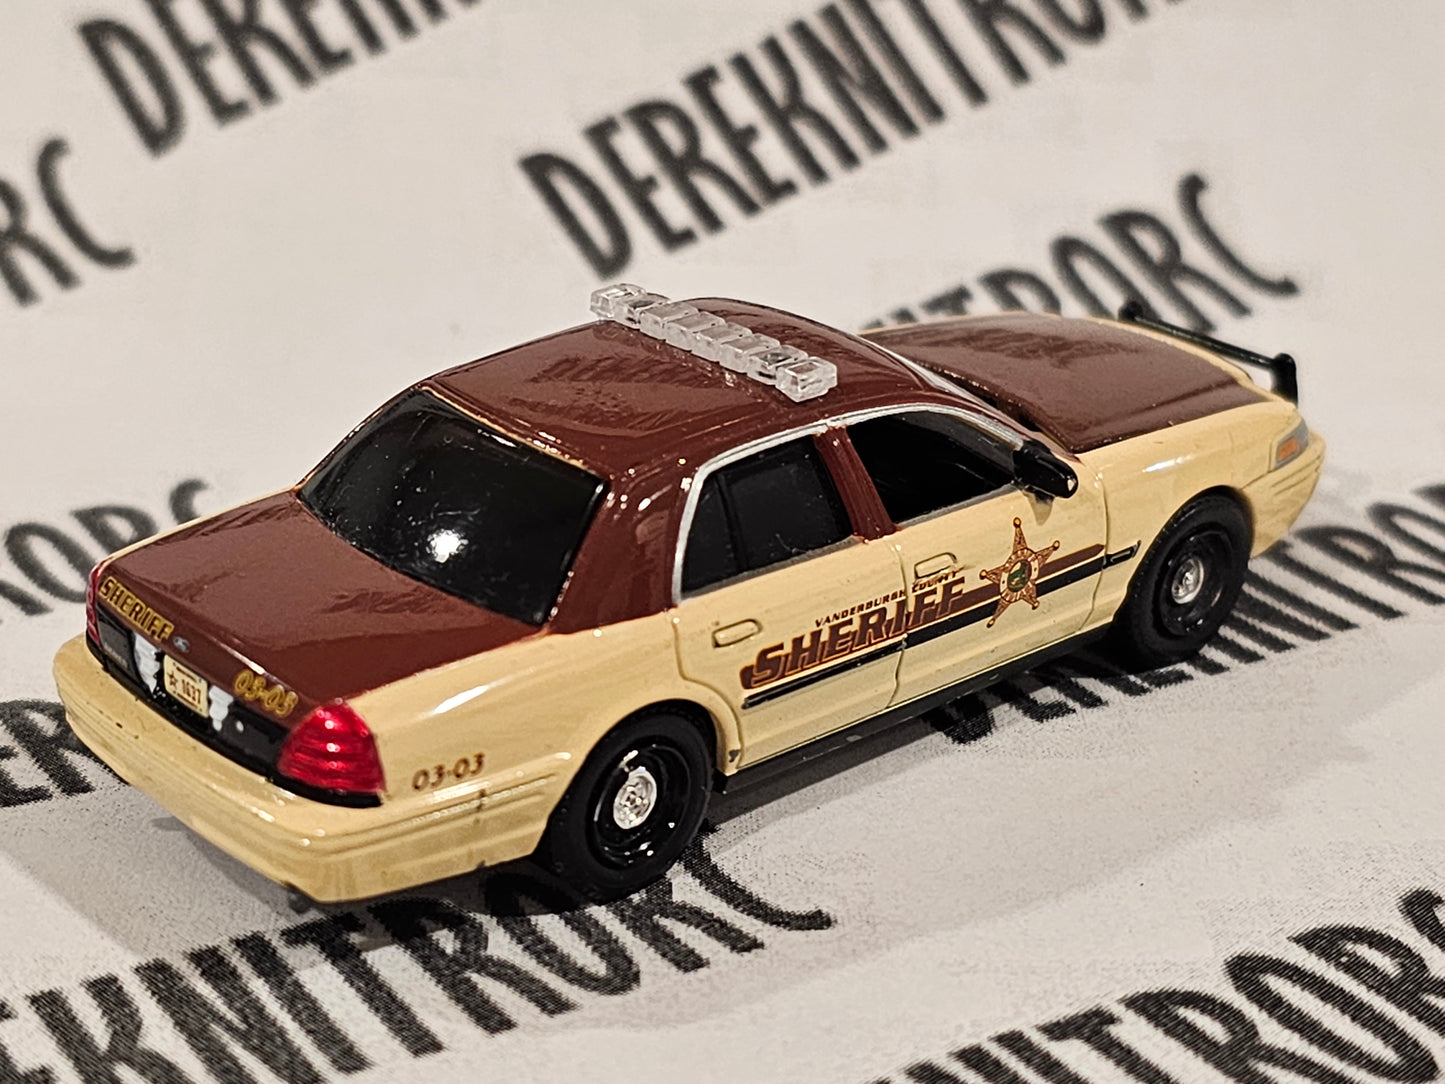 NOT FOR SALE GreenLight Collectibles Deco Sample 2008 Ford Crown Victoria Hot Pursuit Series 5